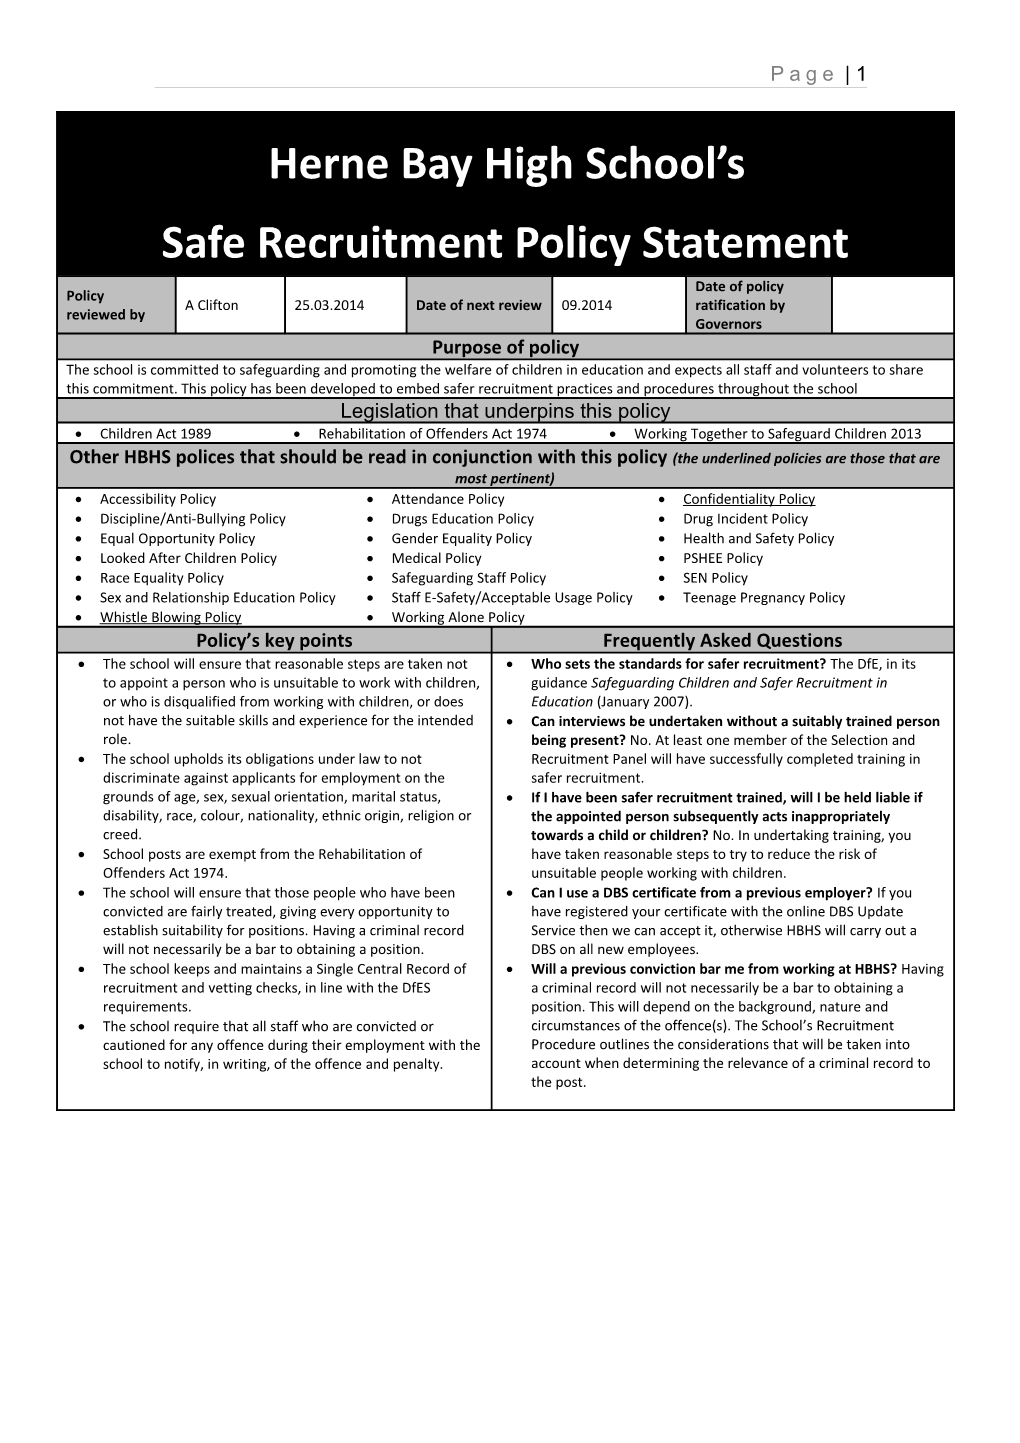 Safe Recruitment Policy Statement